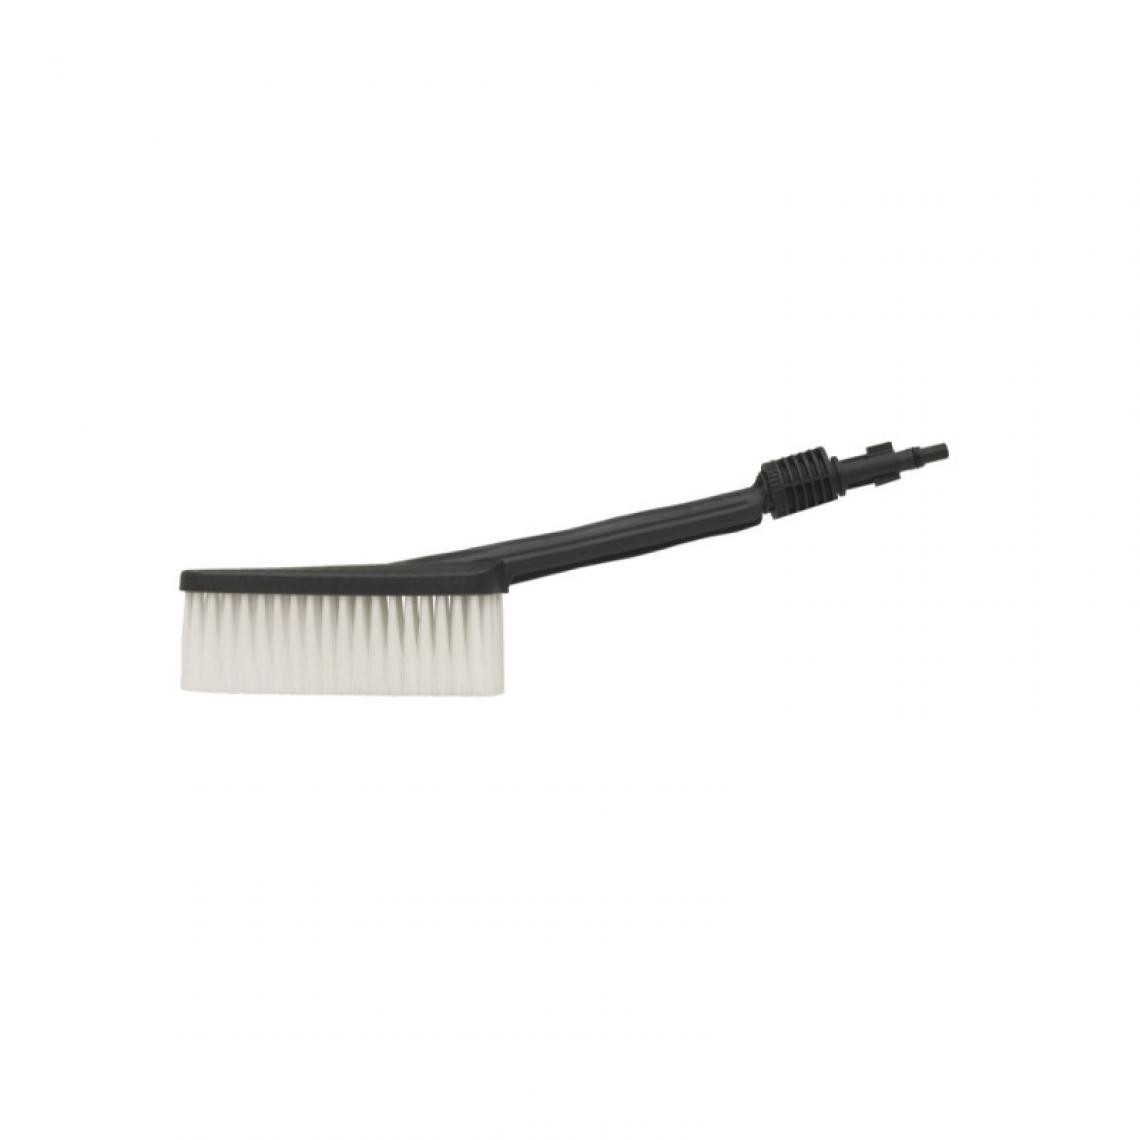 Stanley - Brosse fixe large STANLEY pour nettoyeur haute pression - 170mm - 241954 - Nettoyeurs haute pression